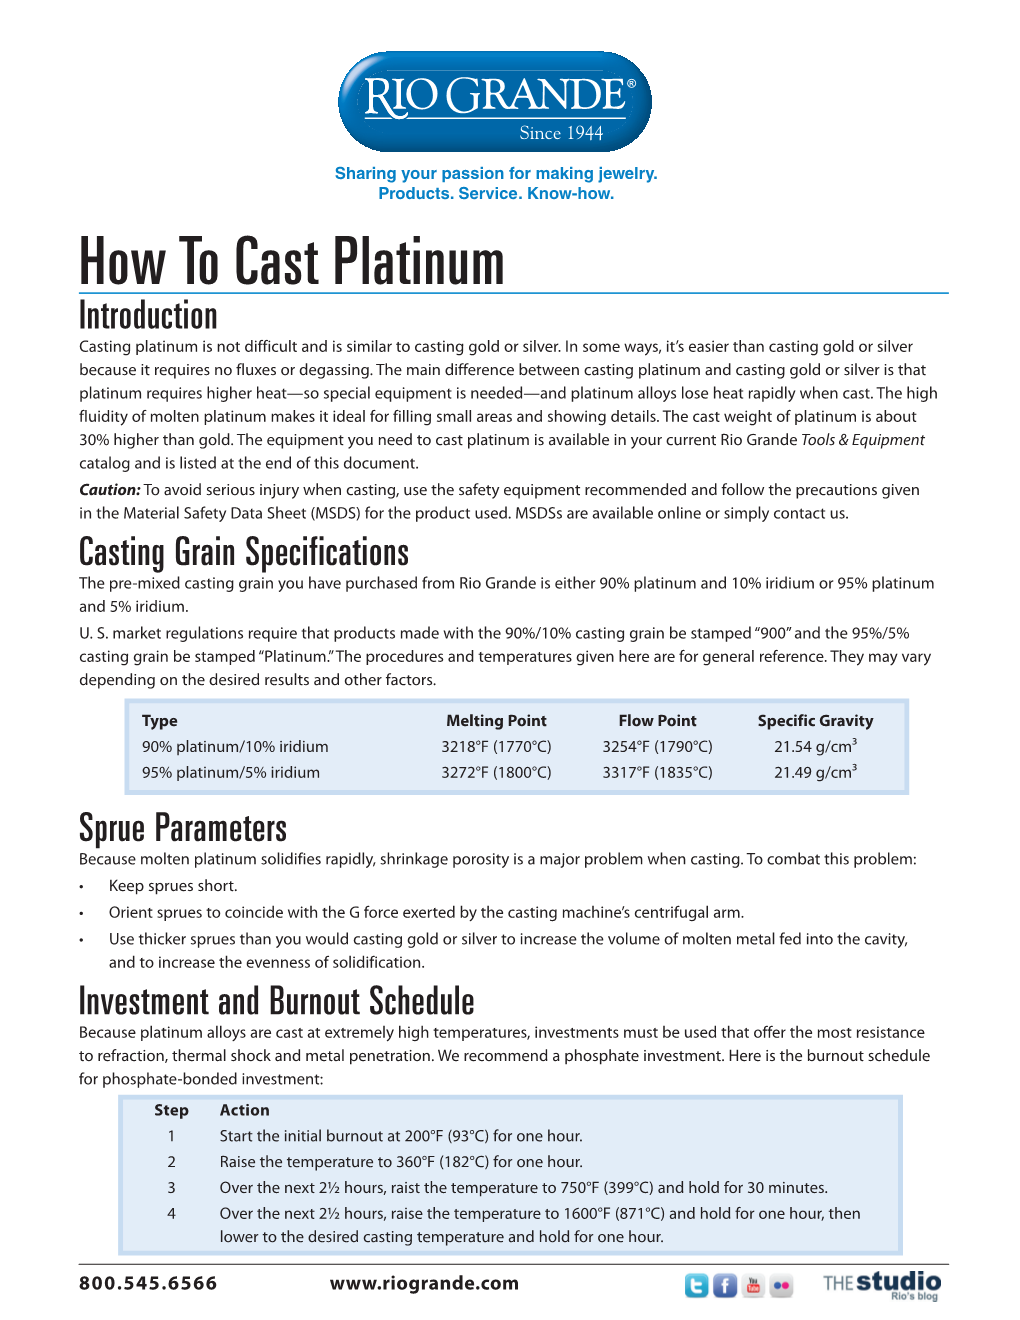 How to Cast Platinum Introduction Casting Platinum Is Not Difficult and Is Similar to Casting Gold Or Silver